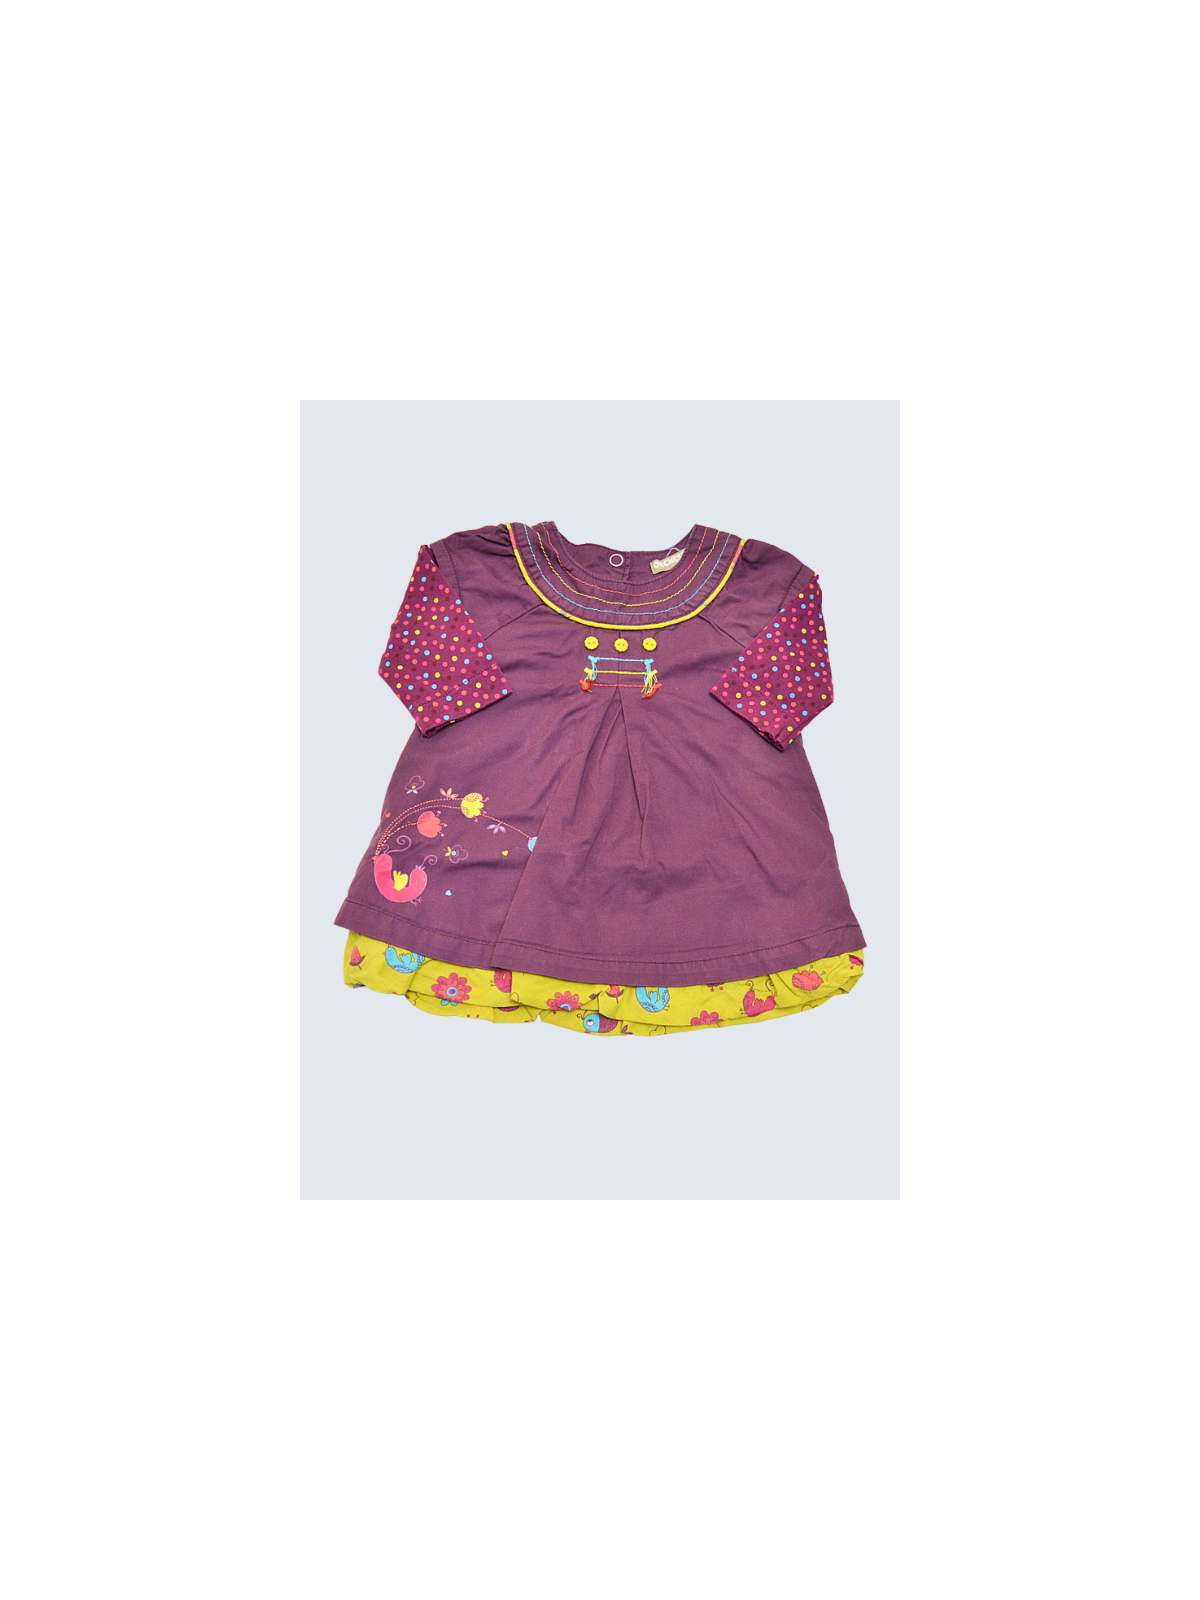 Robe hiver d'occasion Orchestra 6 Mois pour fille.